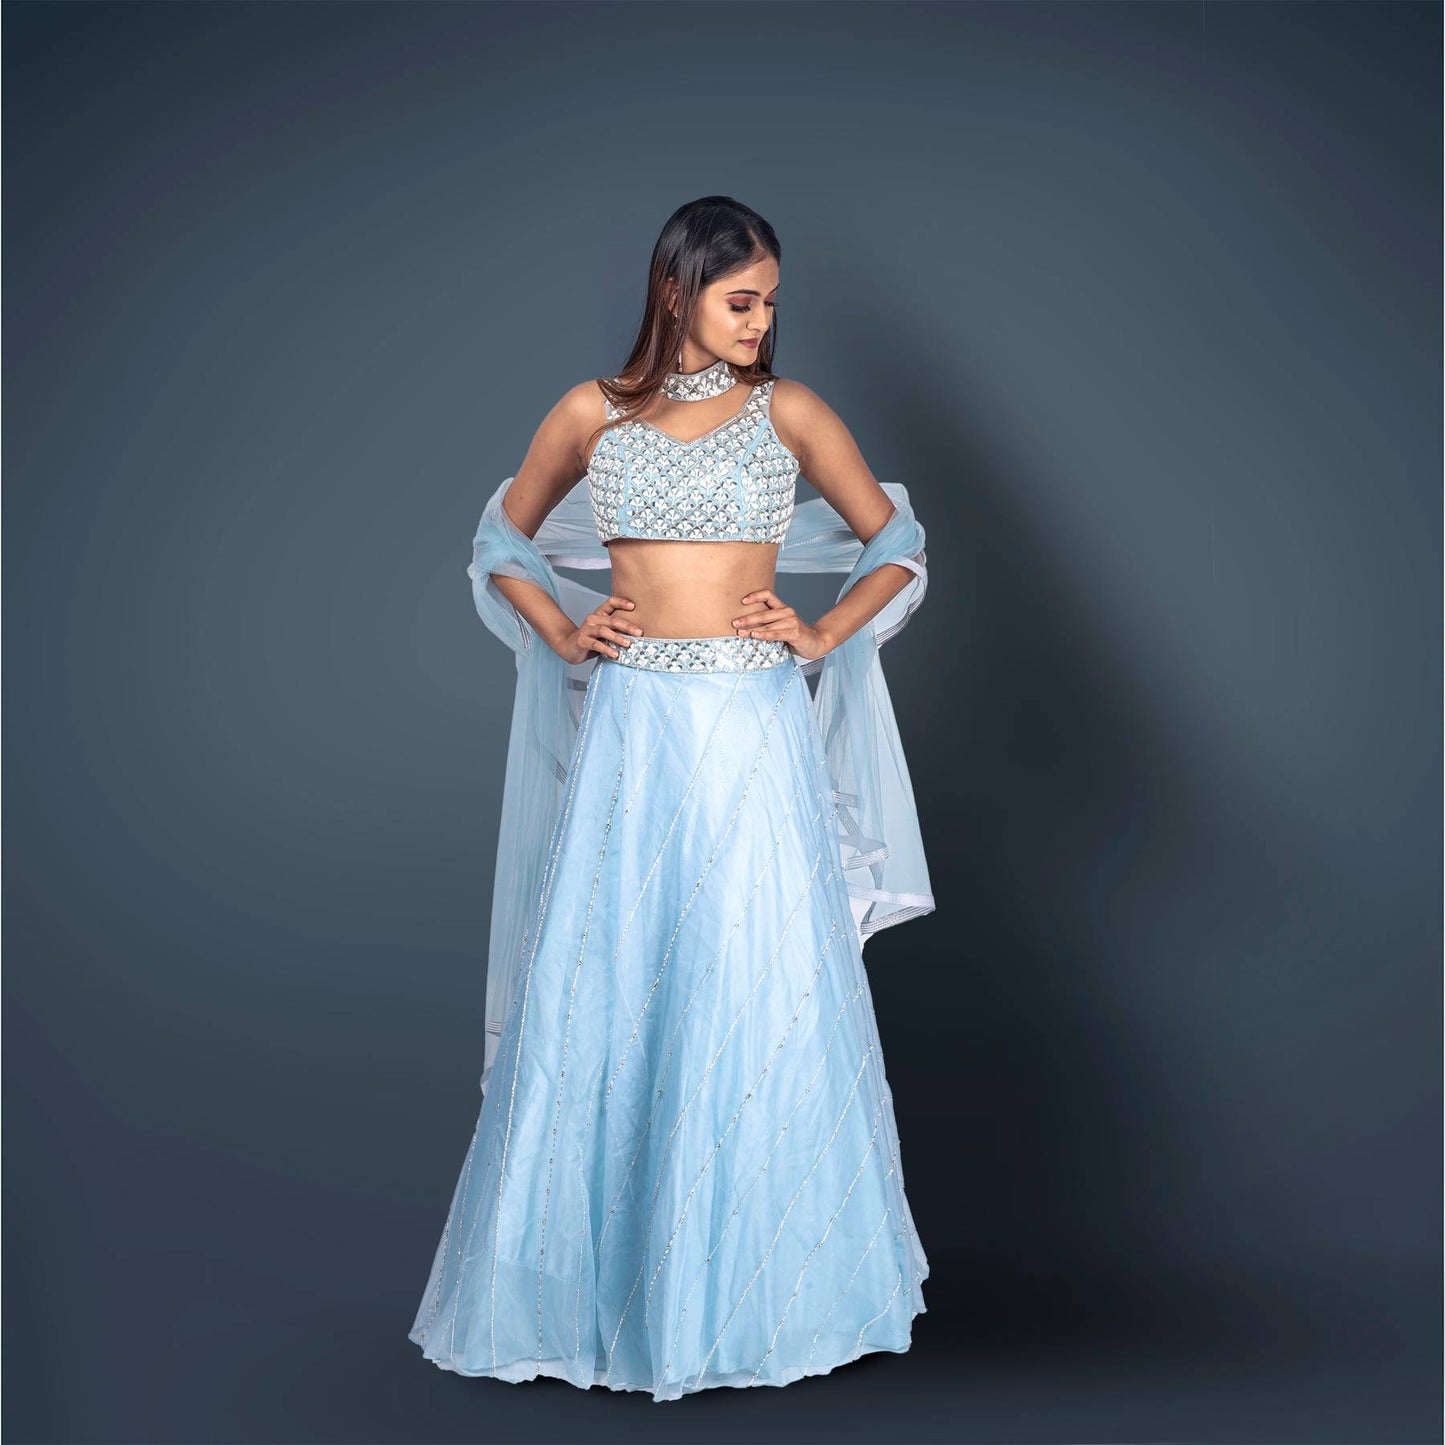 Creamy Blue Lehenga And Crop top Embellished With Pearl And Sali Work